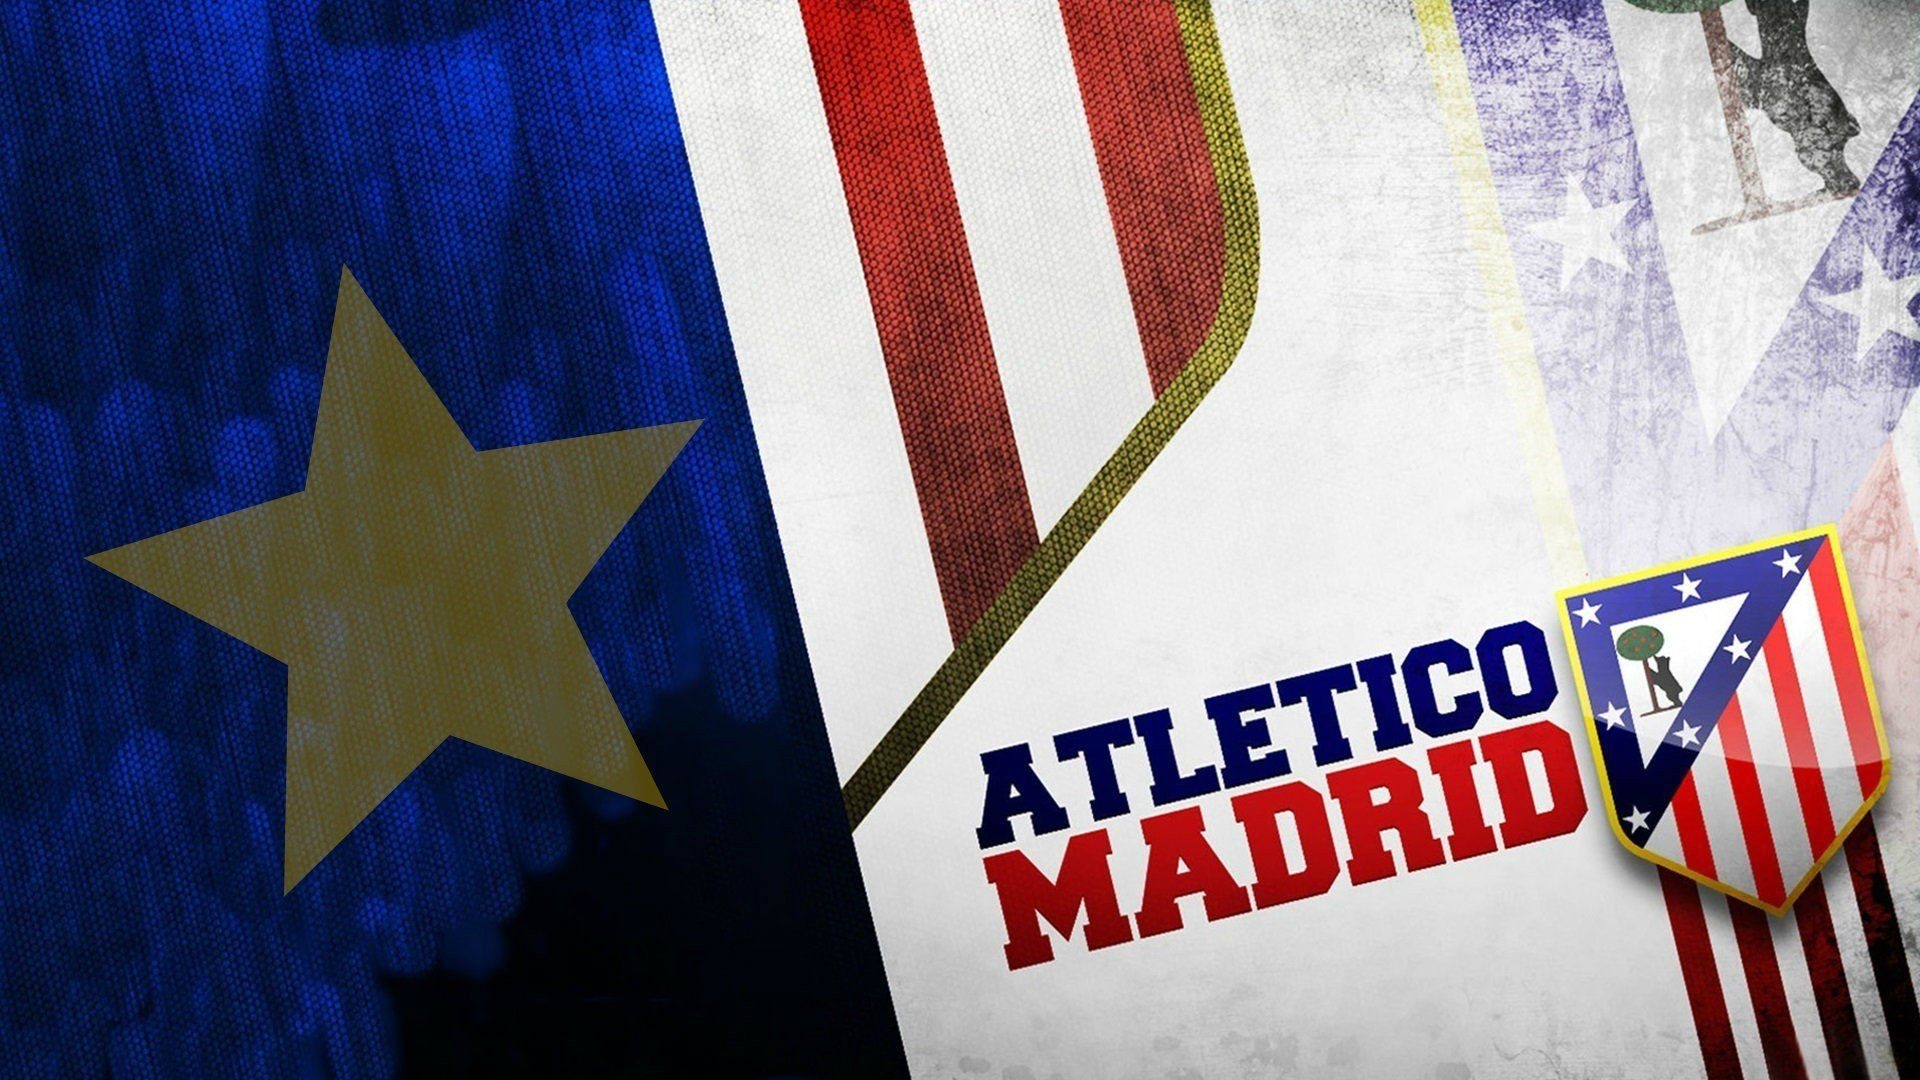 Atletico Madrid: The club had merged with Aviación Nacional of Zaragoza in 1939. 1920x1080 Full HD Background.